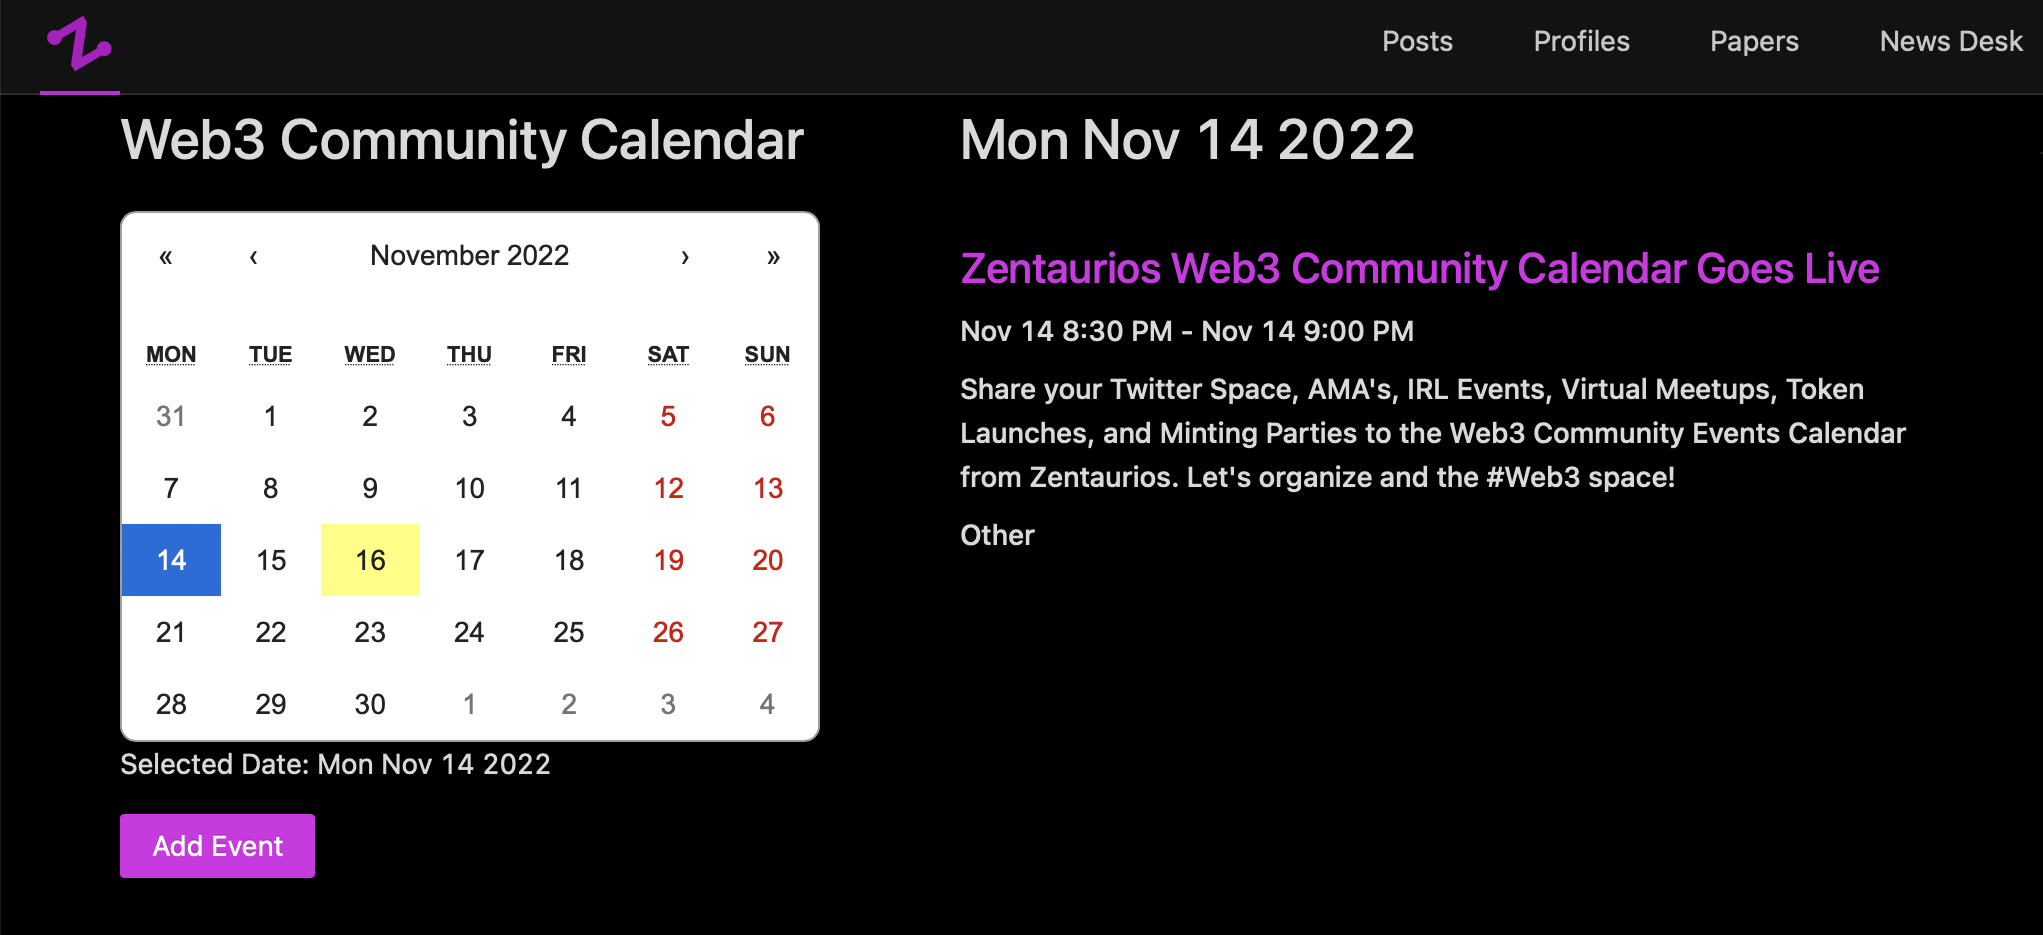 How to Share an Event to the Web3 Community Events Calendar